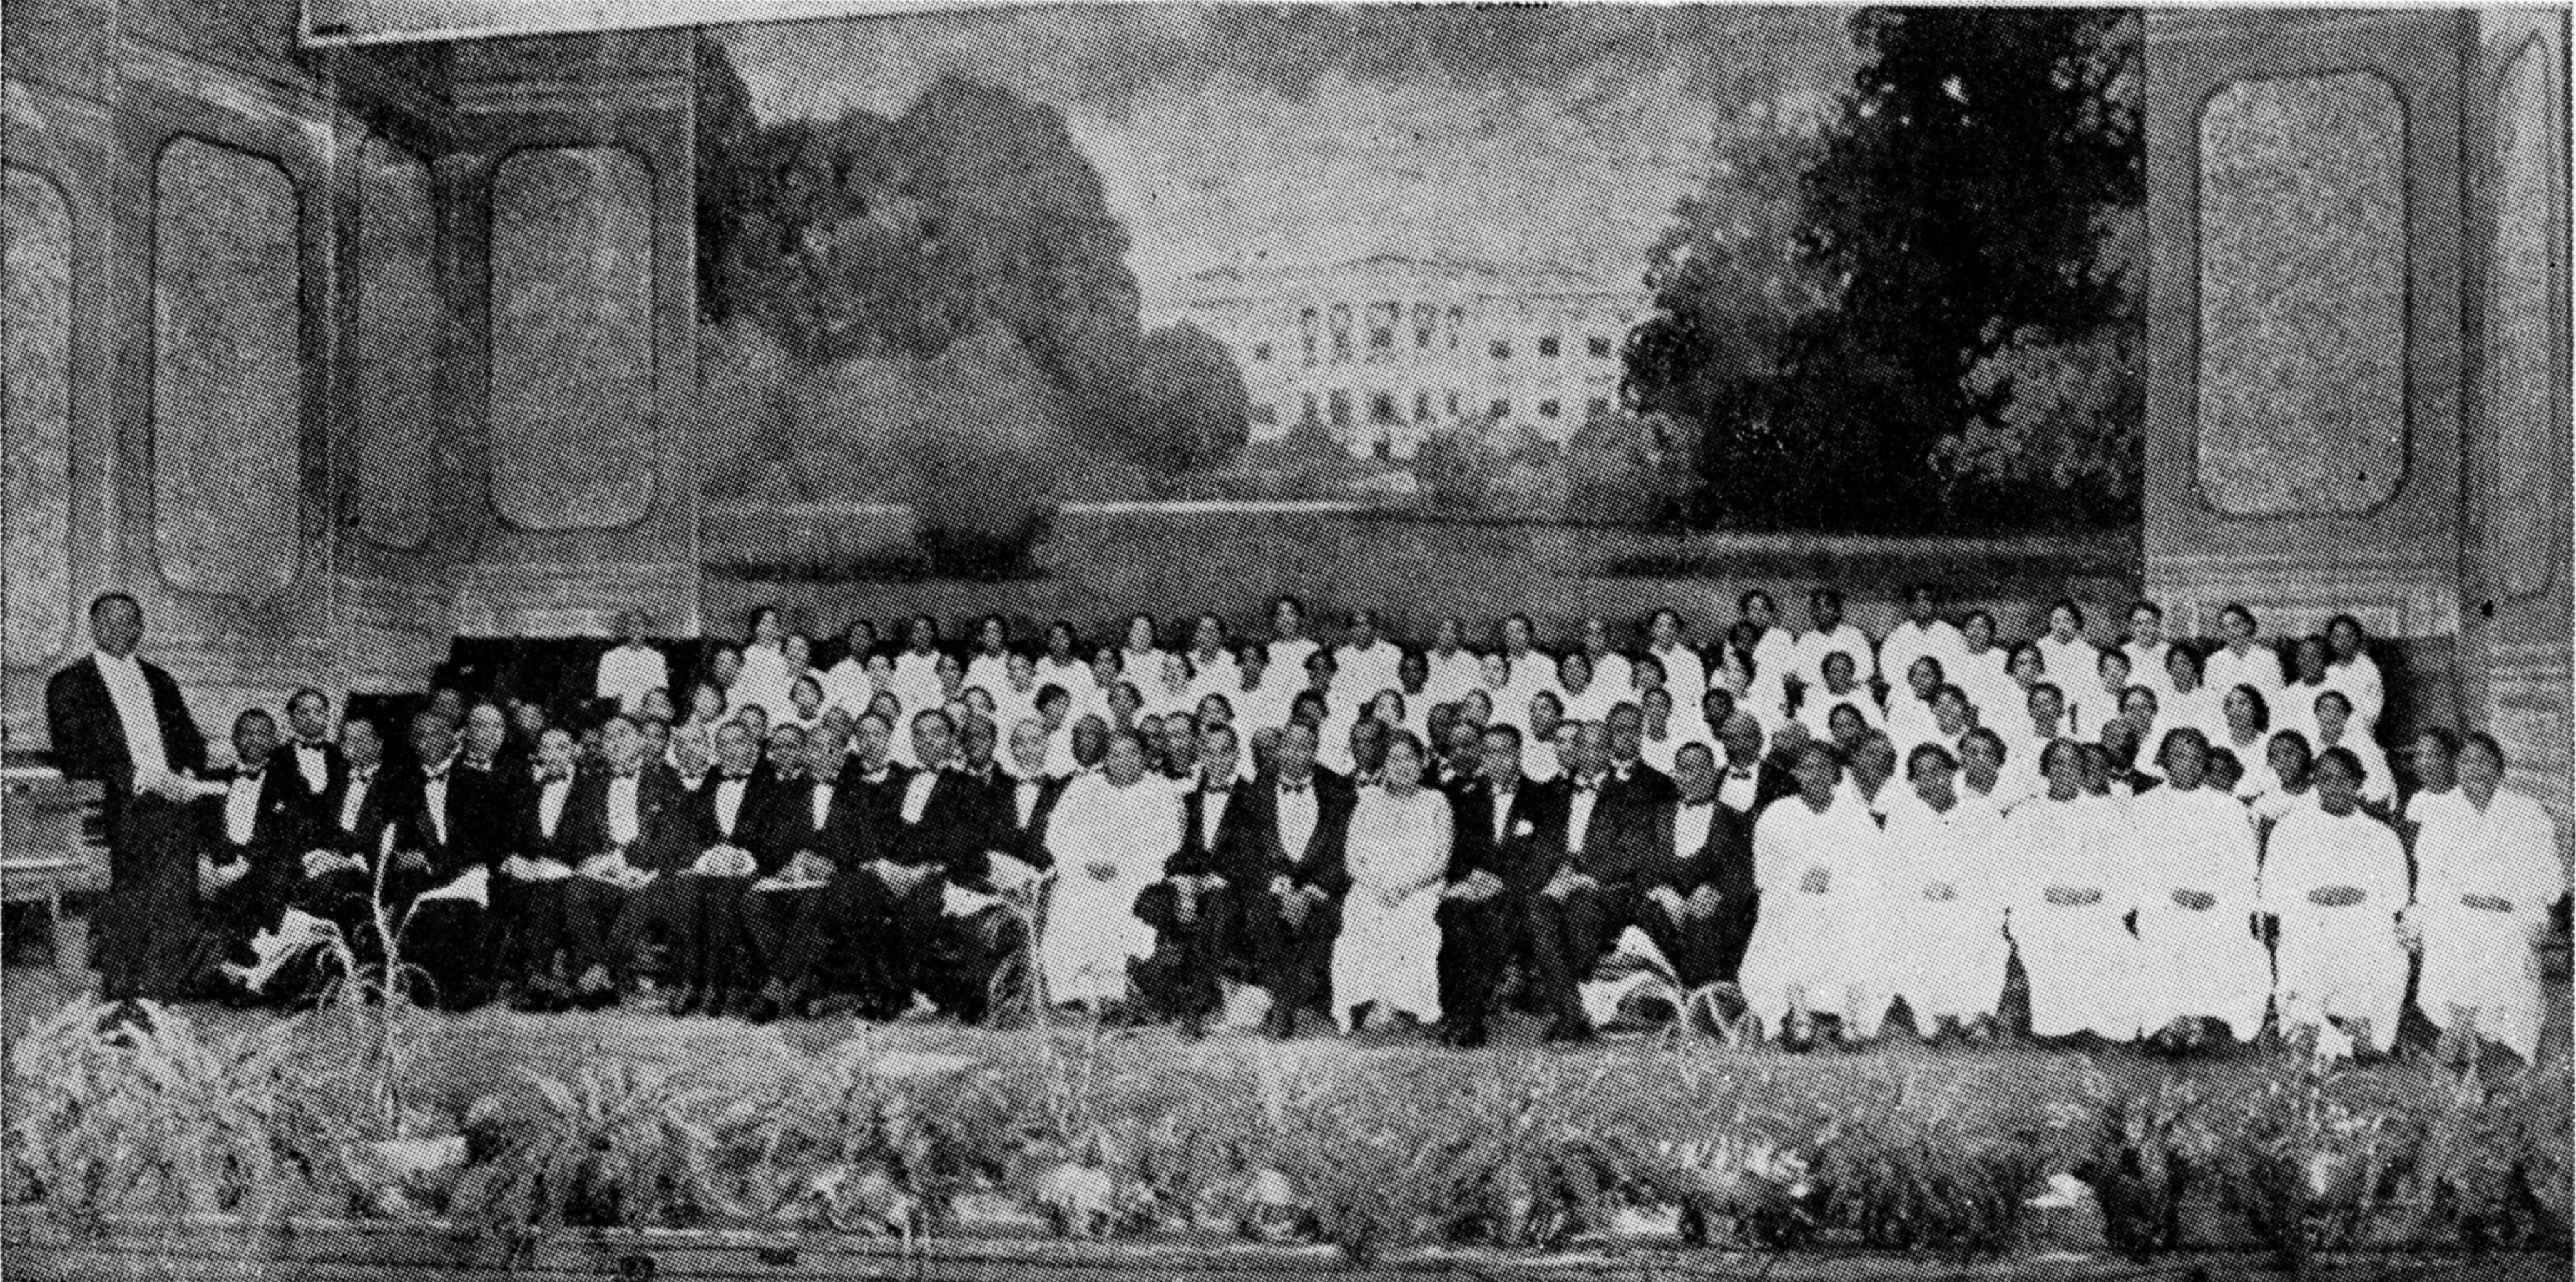 Photograph of the Dett Choral Society